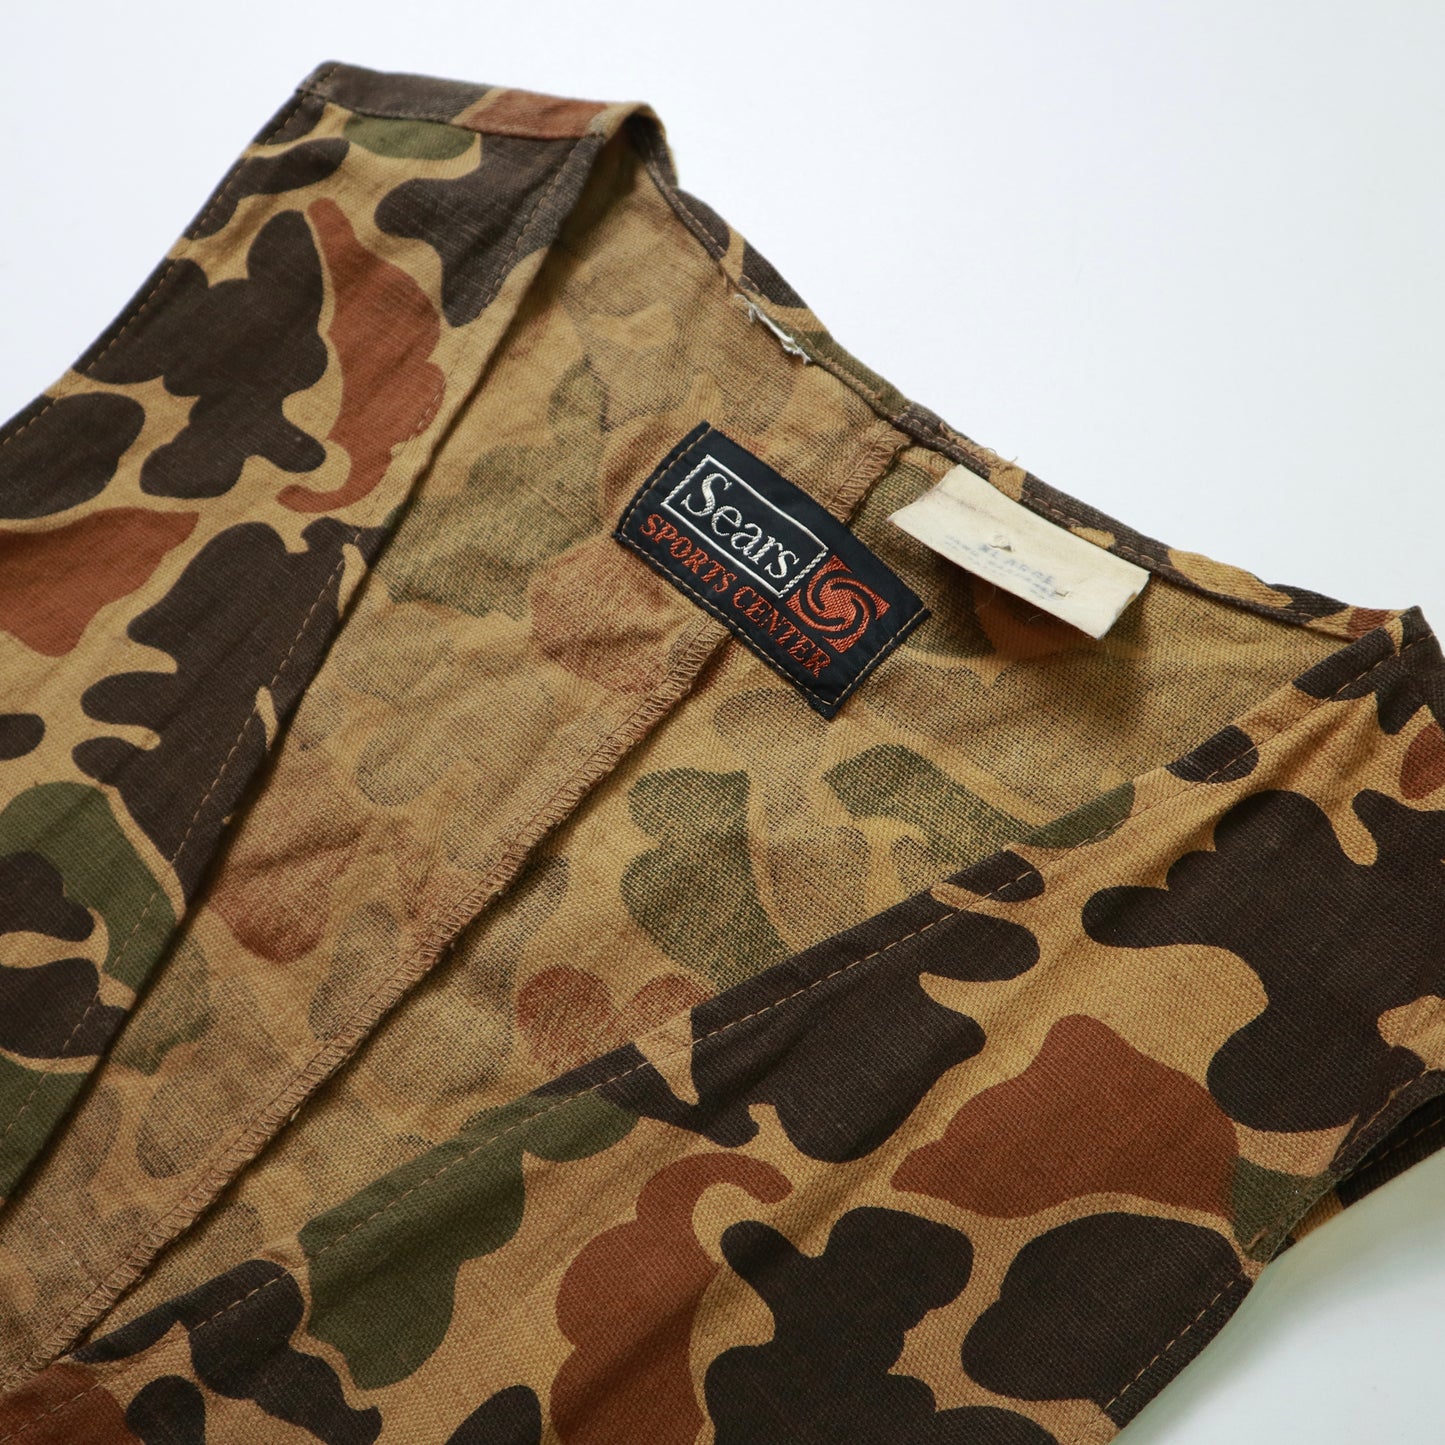 70-80s Sears Camo hunting vest camouflage hunting vest